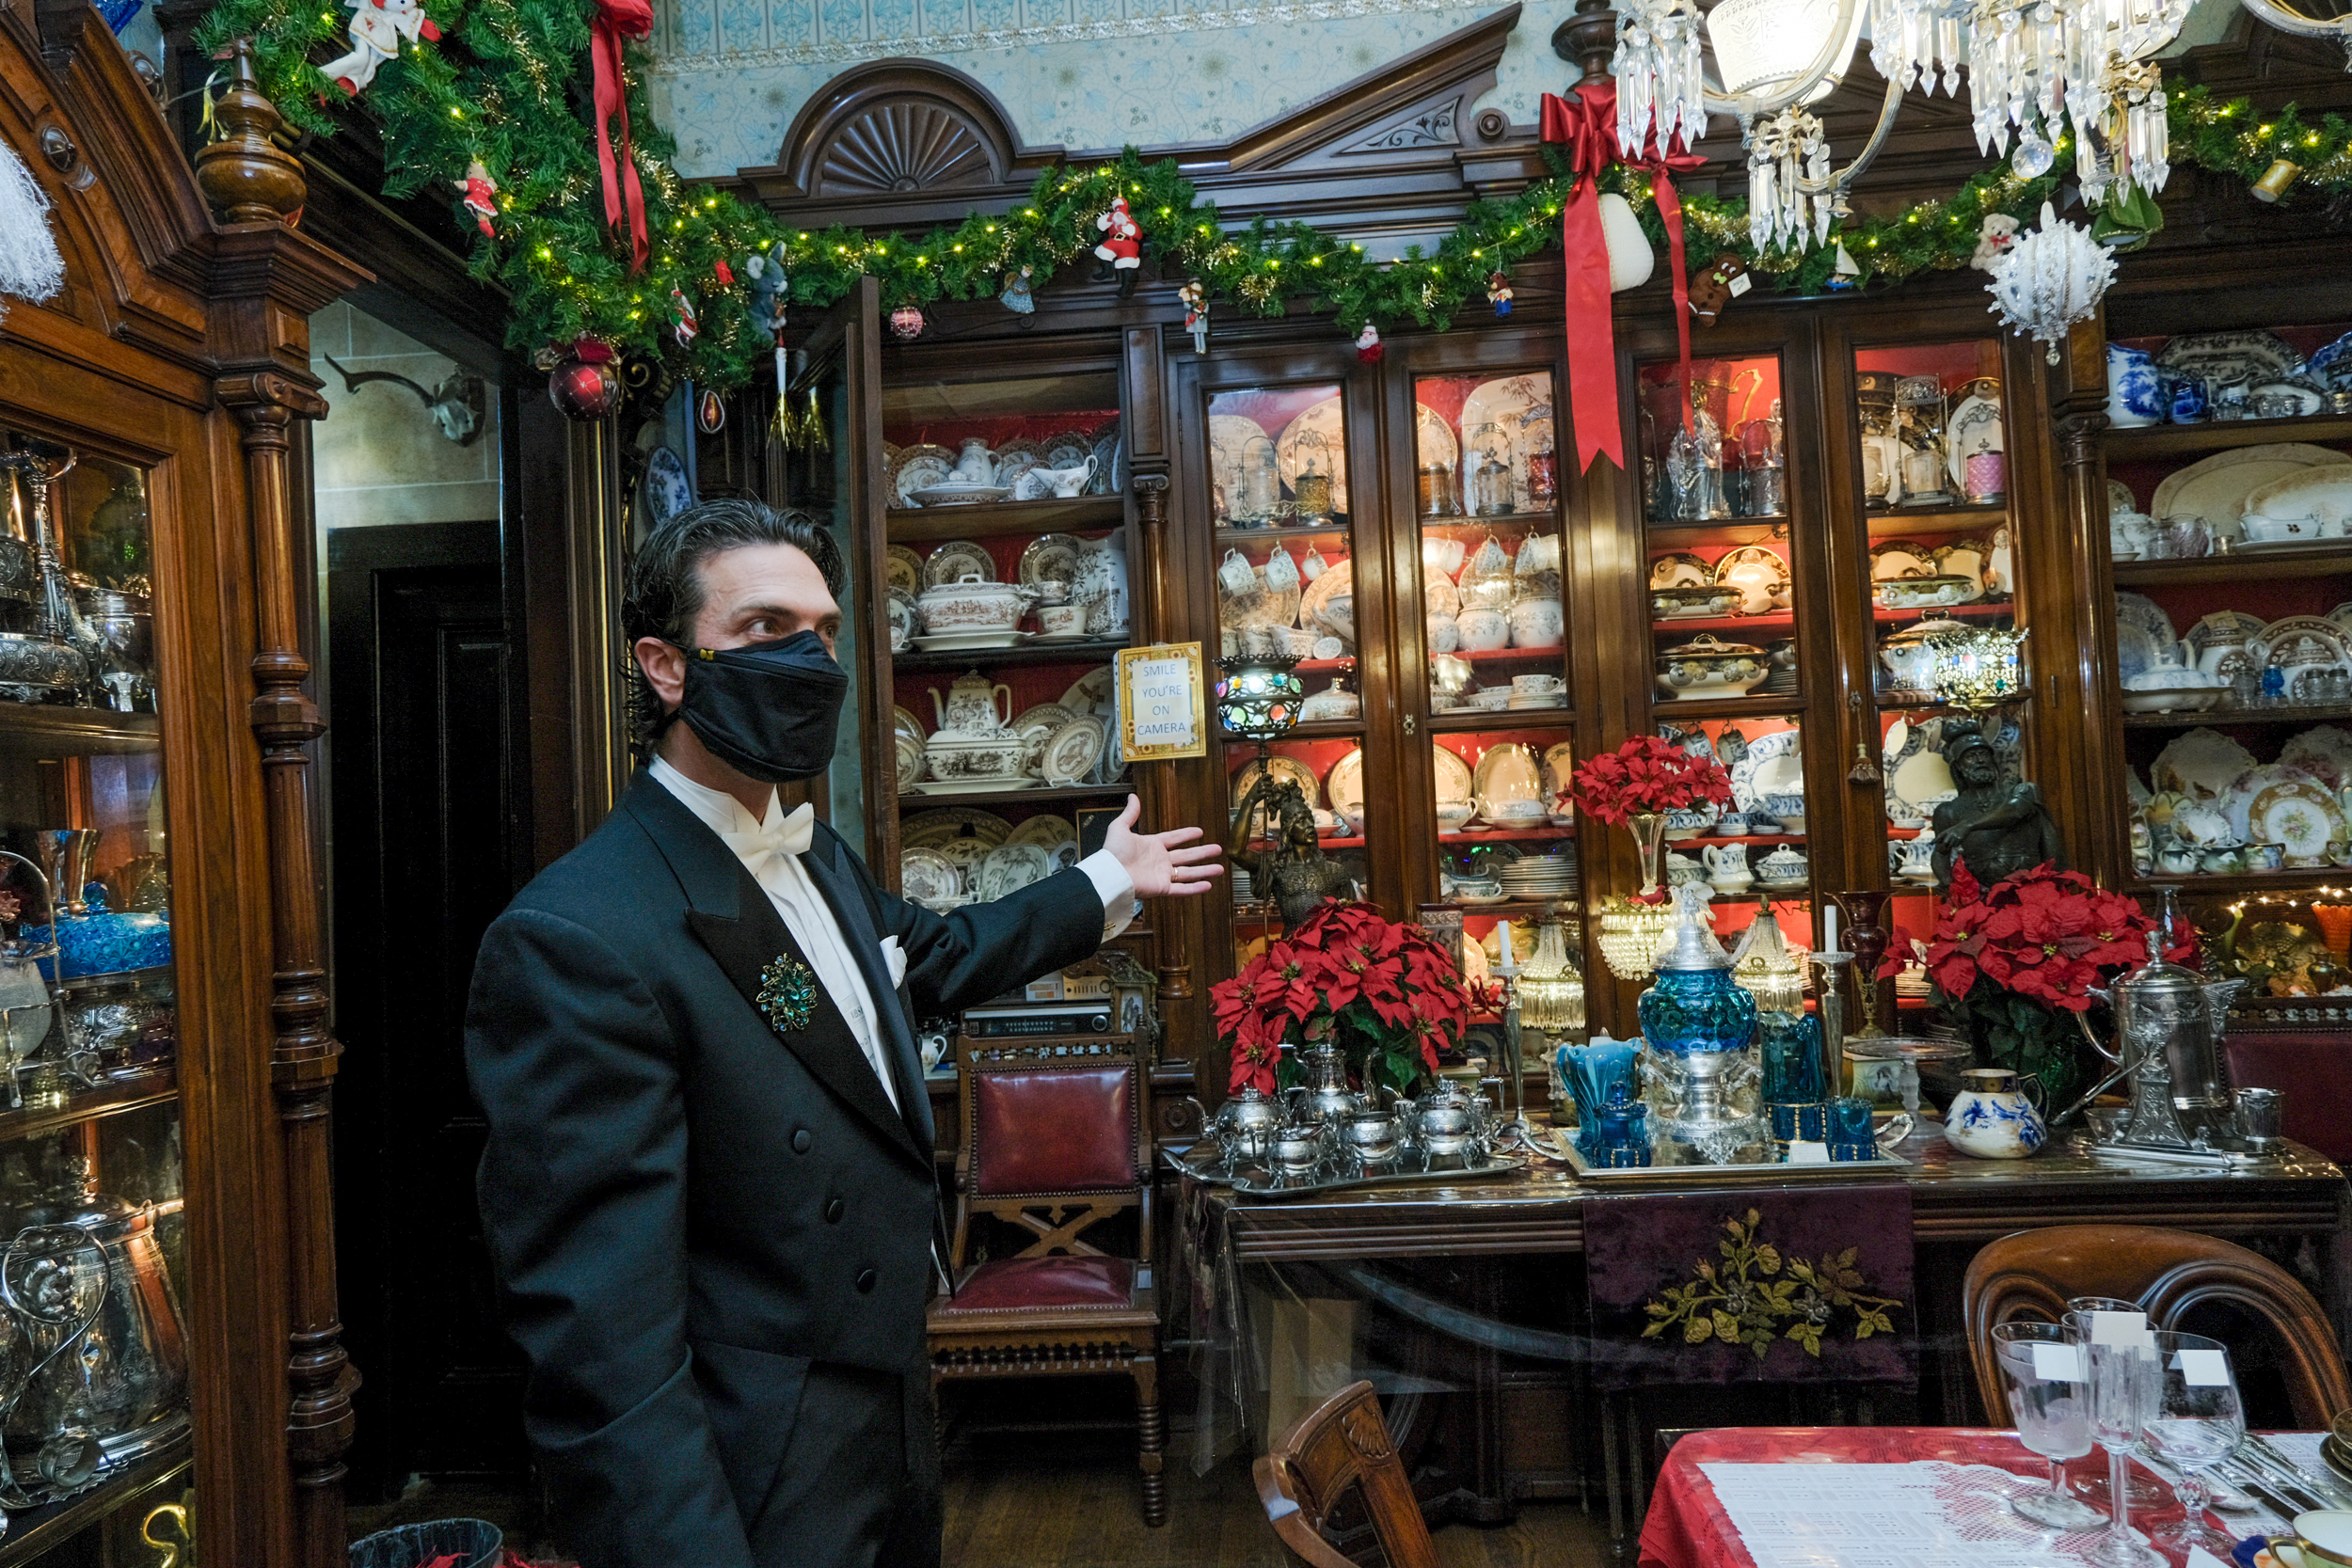 A person in a black suit jacket shows parts of the old victorian house that is decorated in Christmas decor.